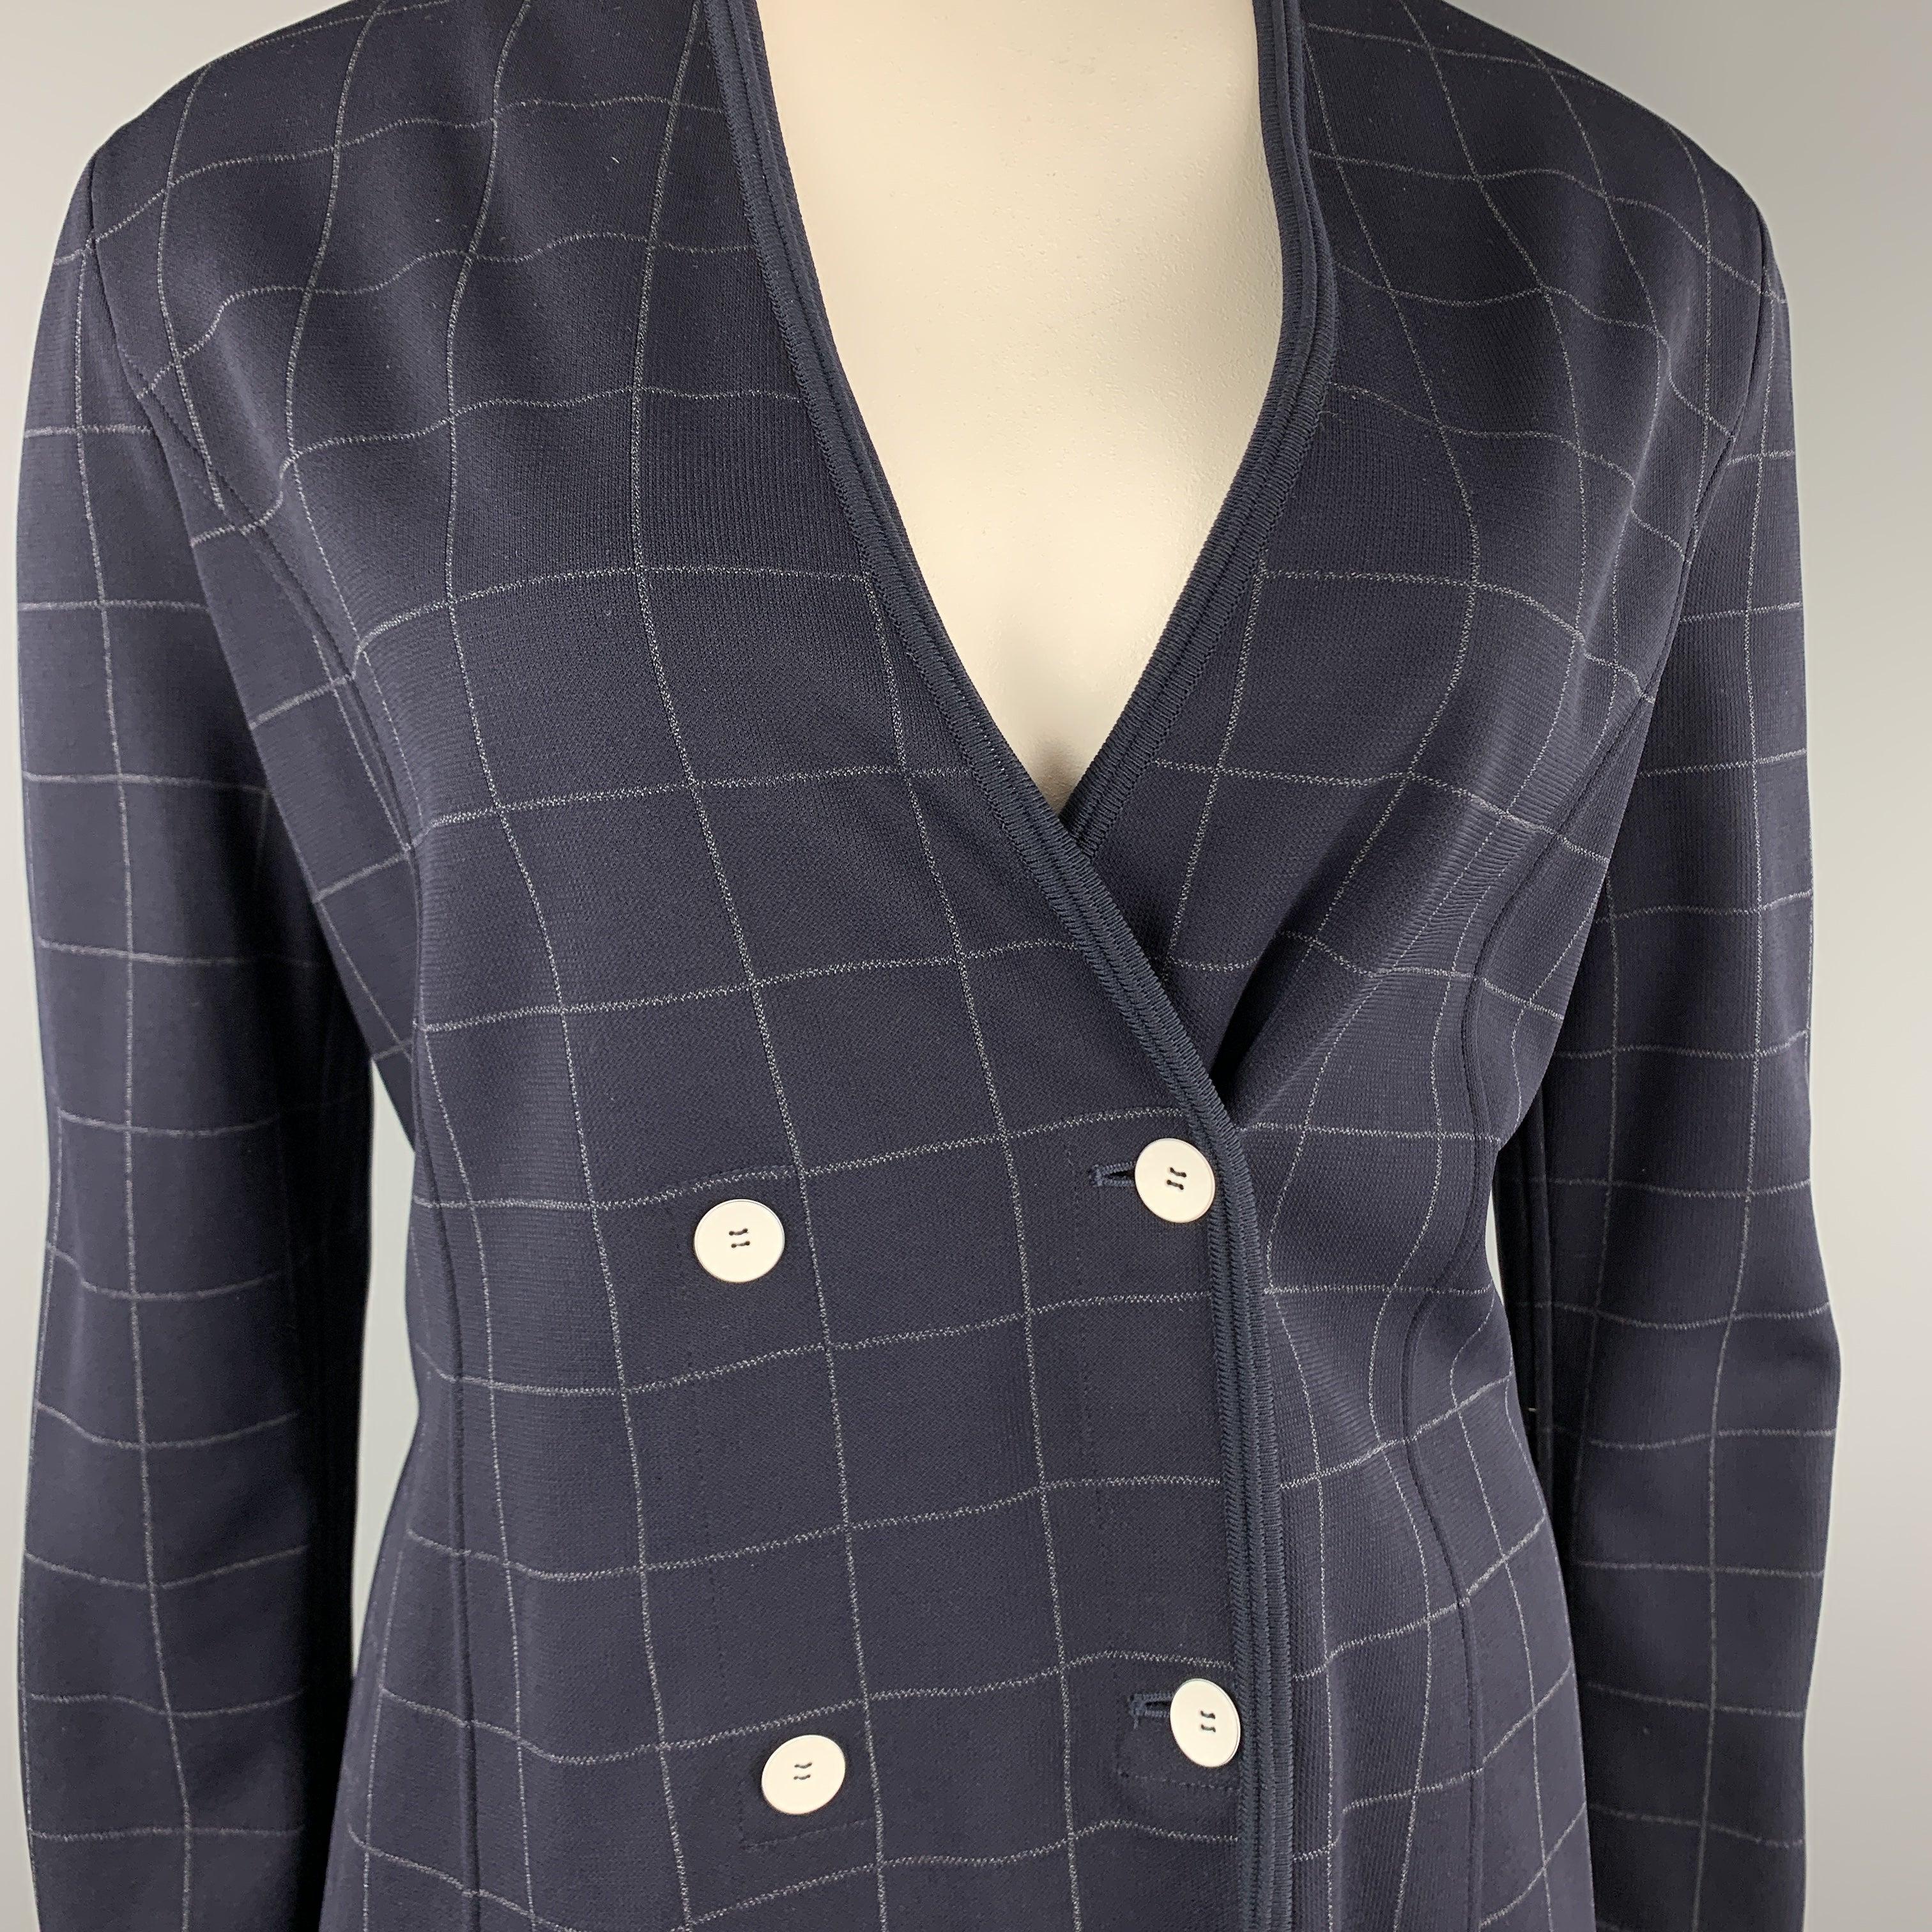 GIORGIO ARMANI cardigan jacket come sin navy and gray windowpane print viscose blend knit with a deep v neck and double breasted button closure. Made in Italy.Excellent
Pre-Owned Condition. 

Marked:   IT 48 

Measurements: 
 
Shoulder: 18.5 inches